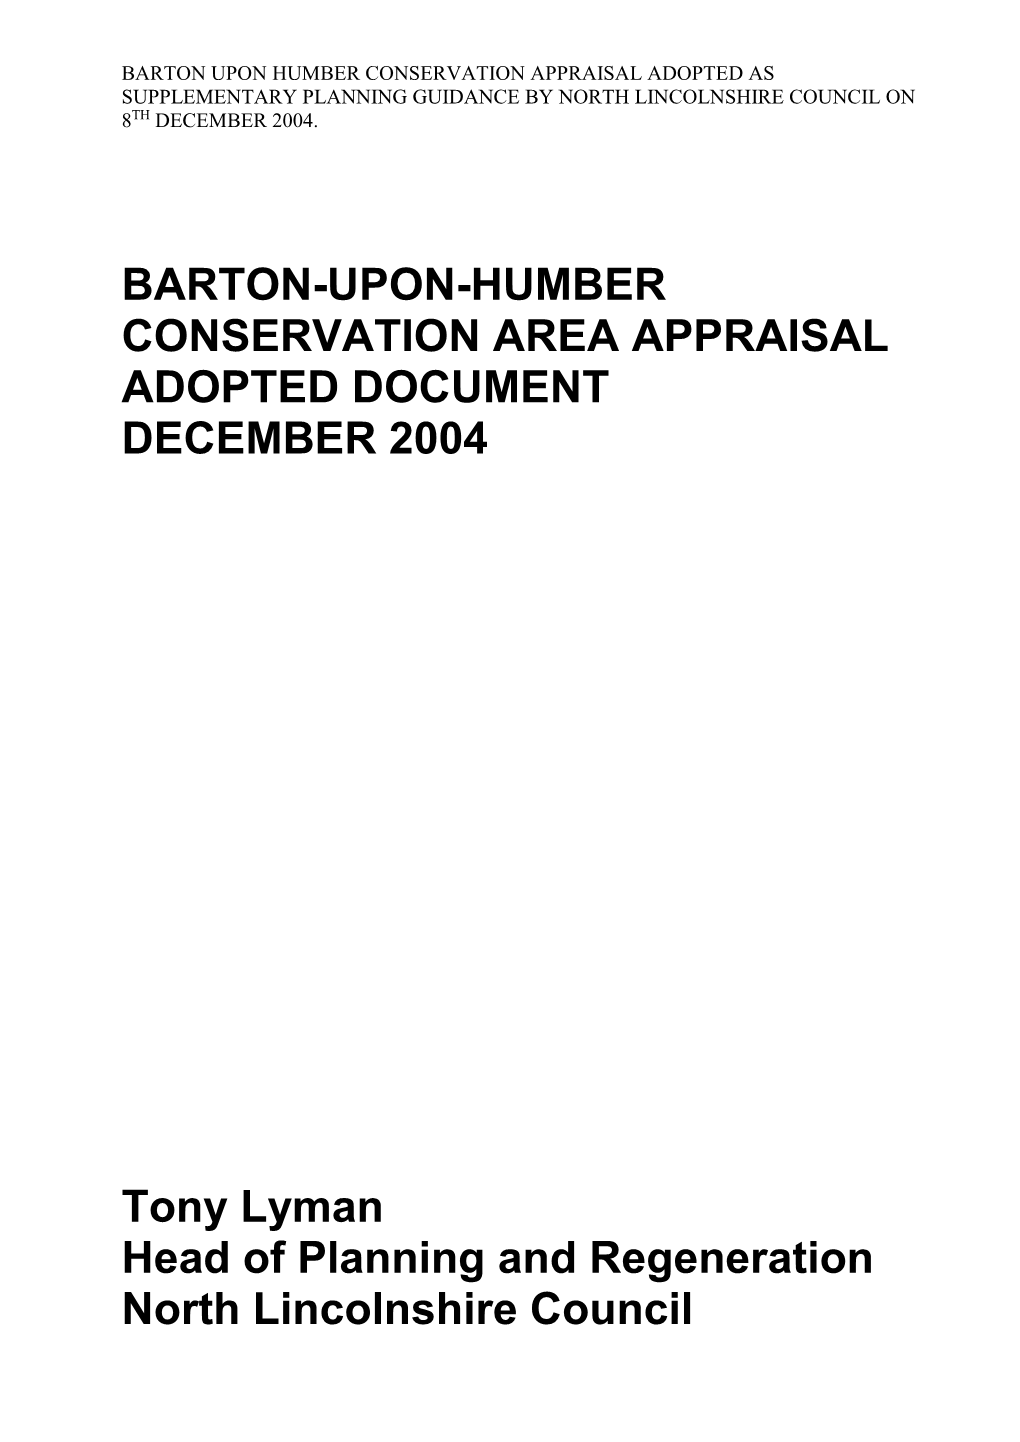 Barton-Upon-Humber Conservation Area Appraisal Adopted Document December 2004